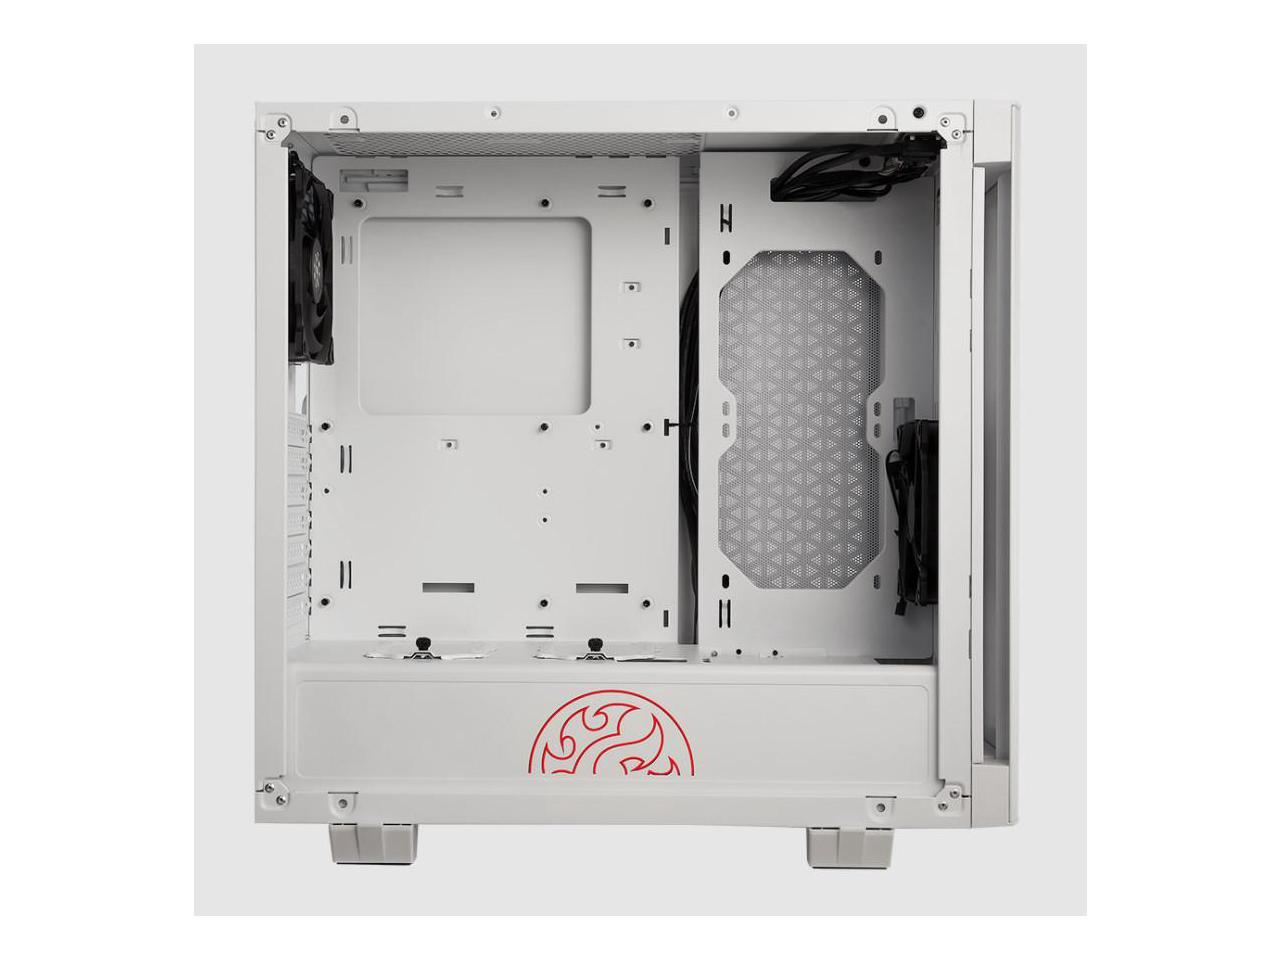 XPG INVADER ATX Mid Tower Chassis -White - INVADER-WHCWW - image 4 of 8